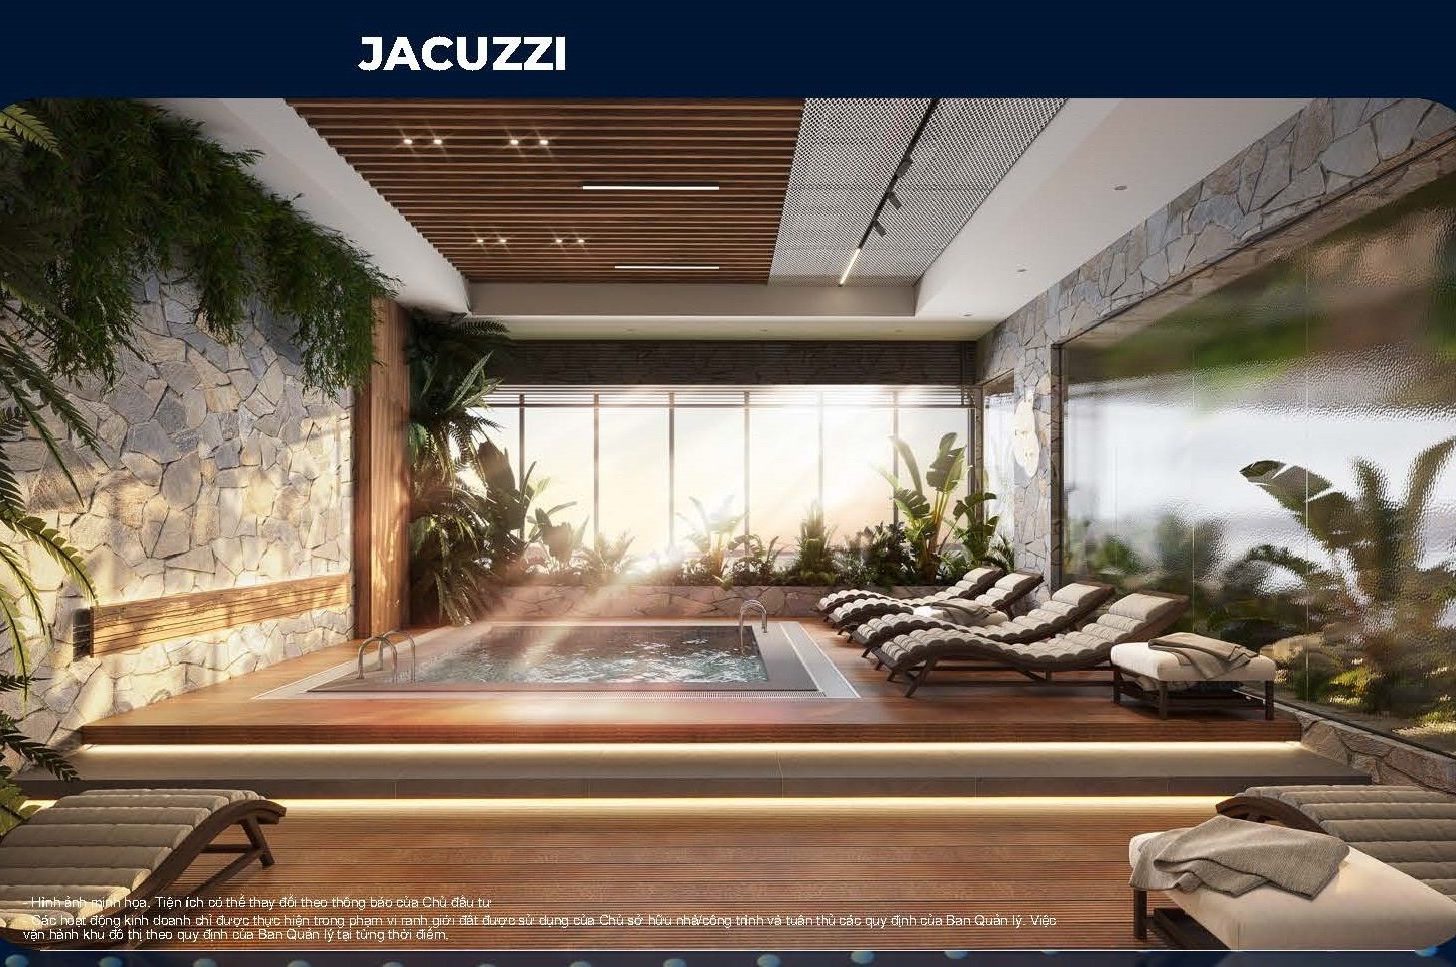 jacuzzi the 5 way